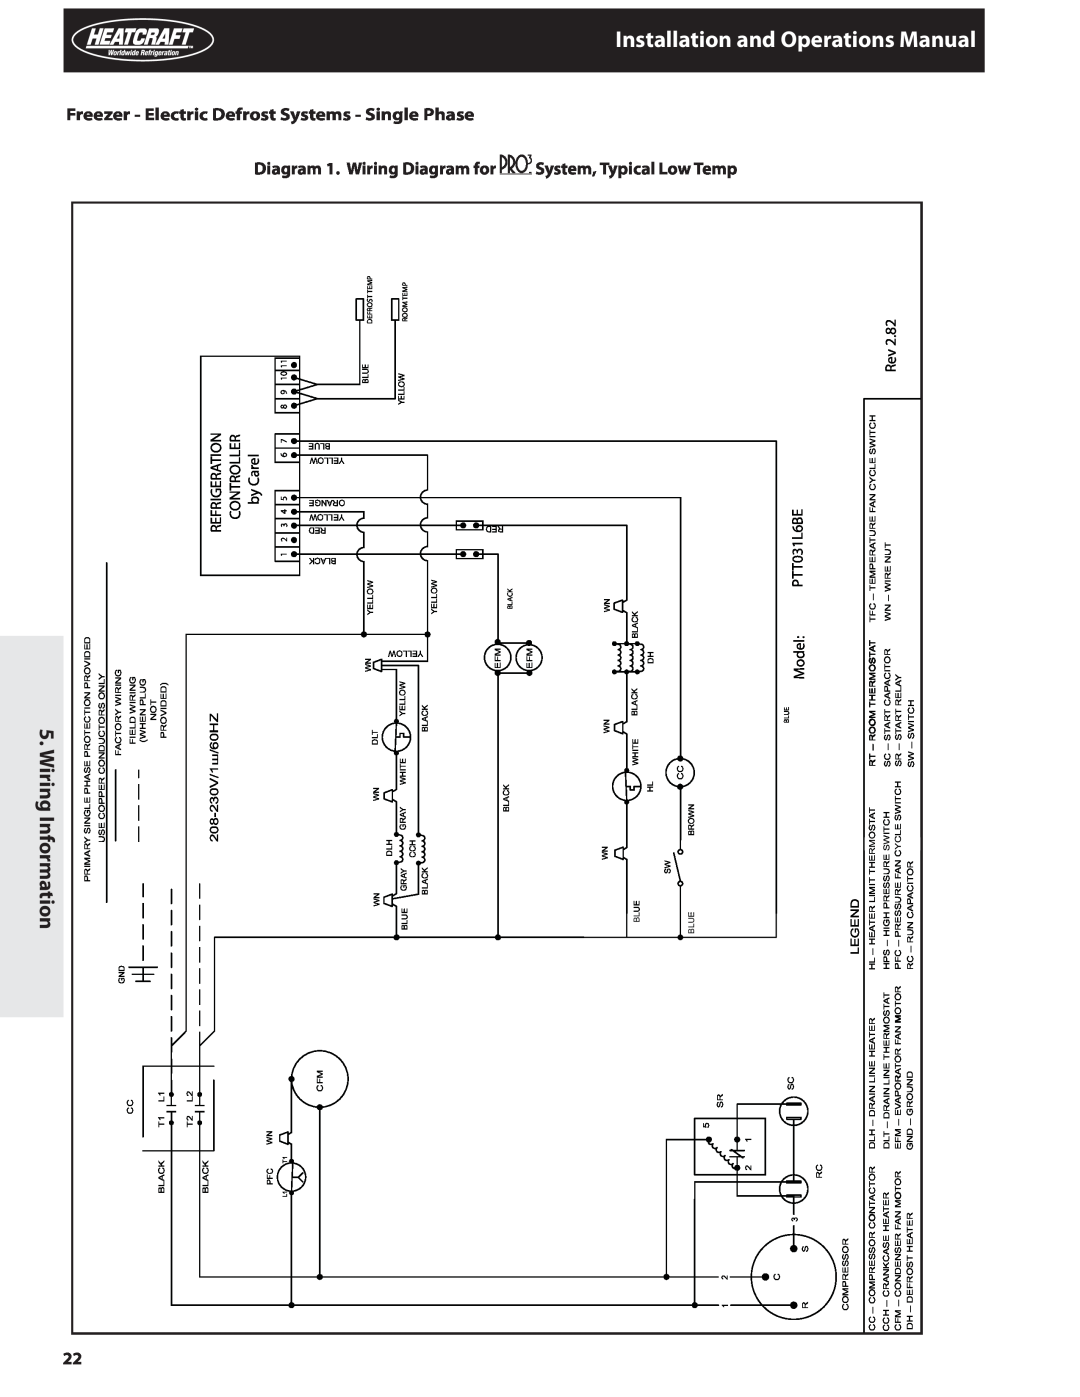 Heatcraft Refrigeration Products H-IM-82C Manual, WiriInformation.5g, Defrost Systems - Single Phase, Temp, and Operations 